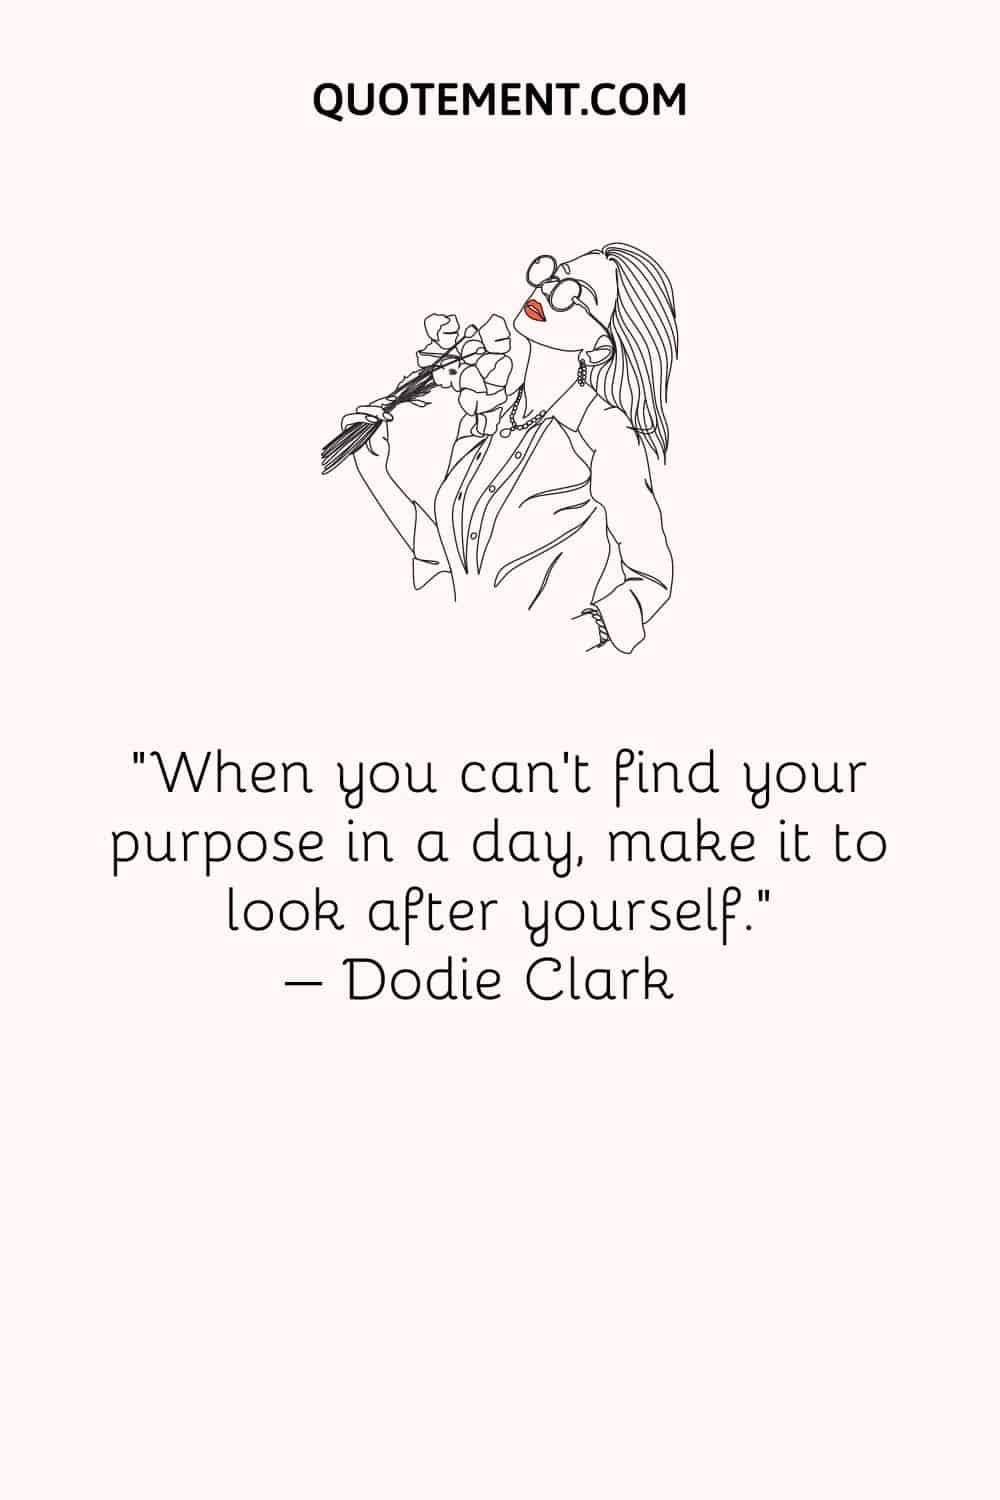 When you can’t find your purpose in a day, make it to look after yourself